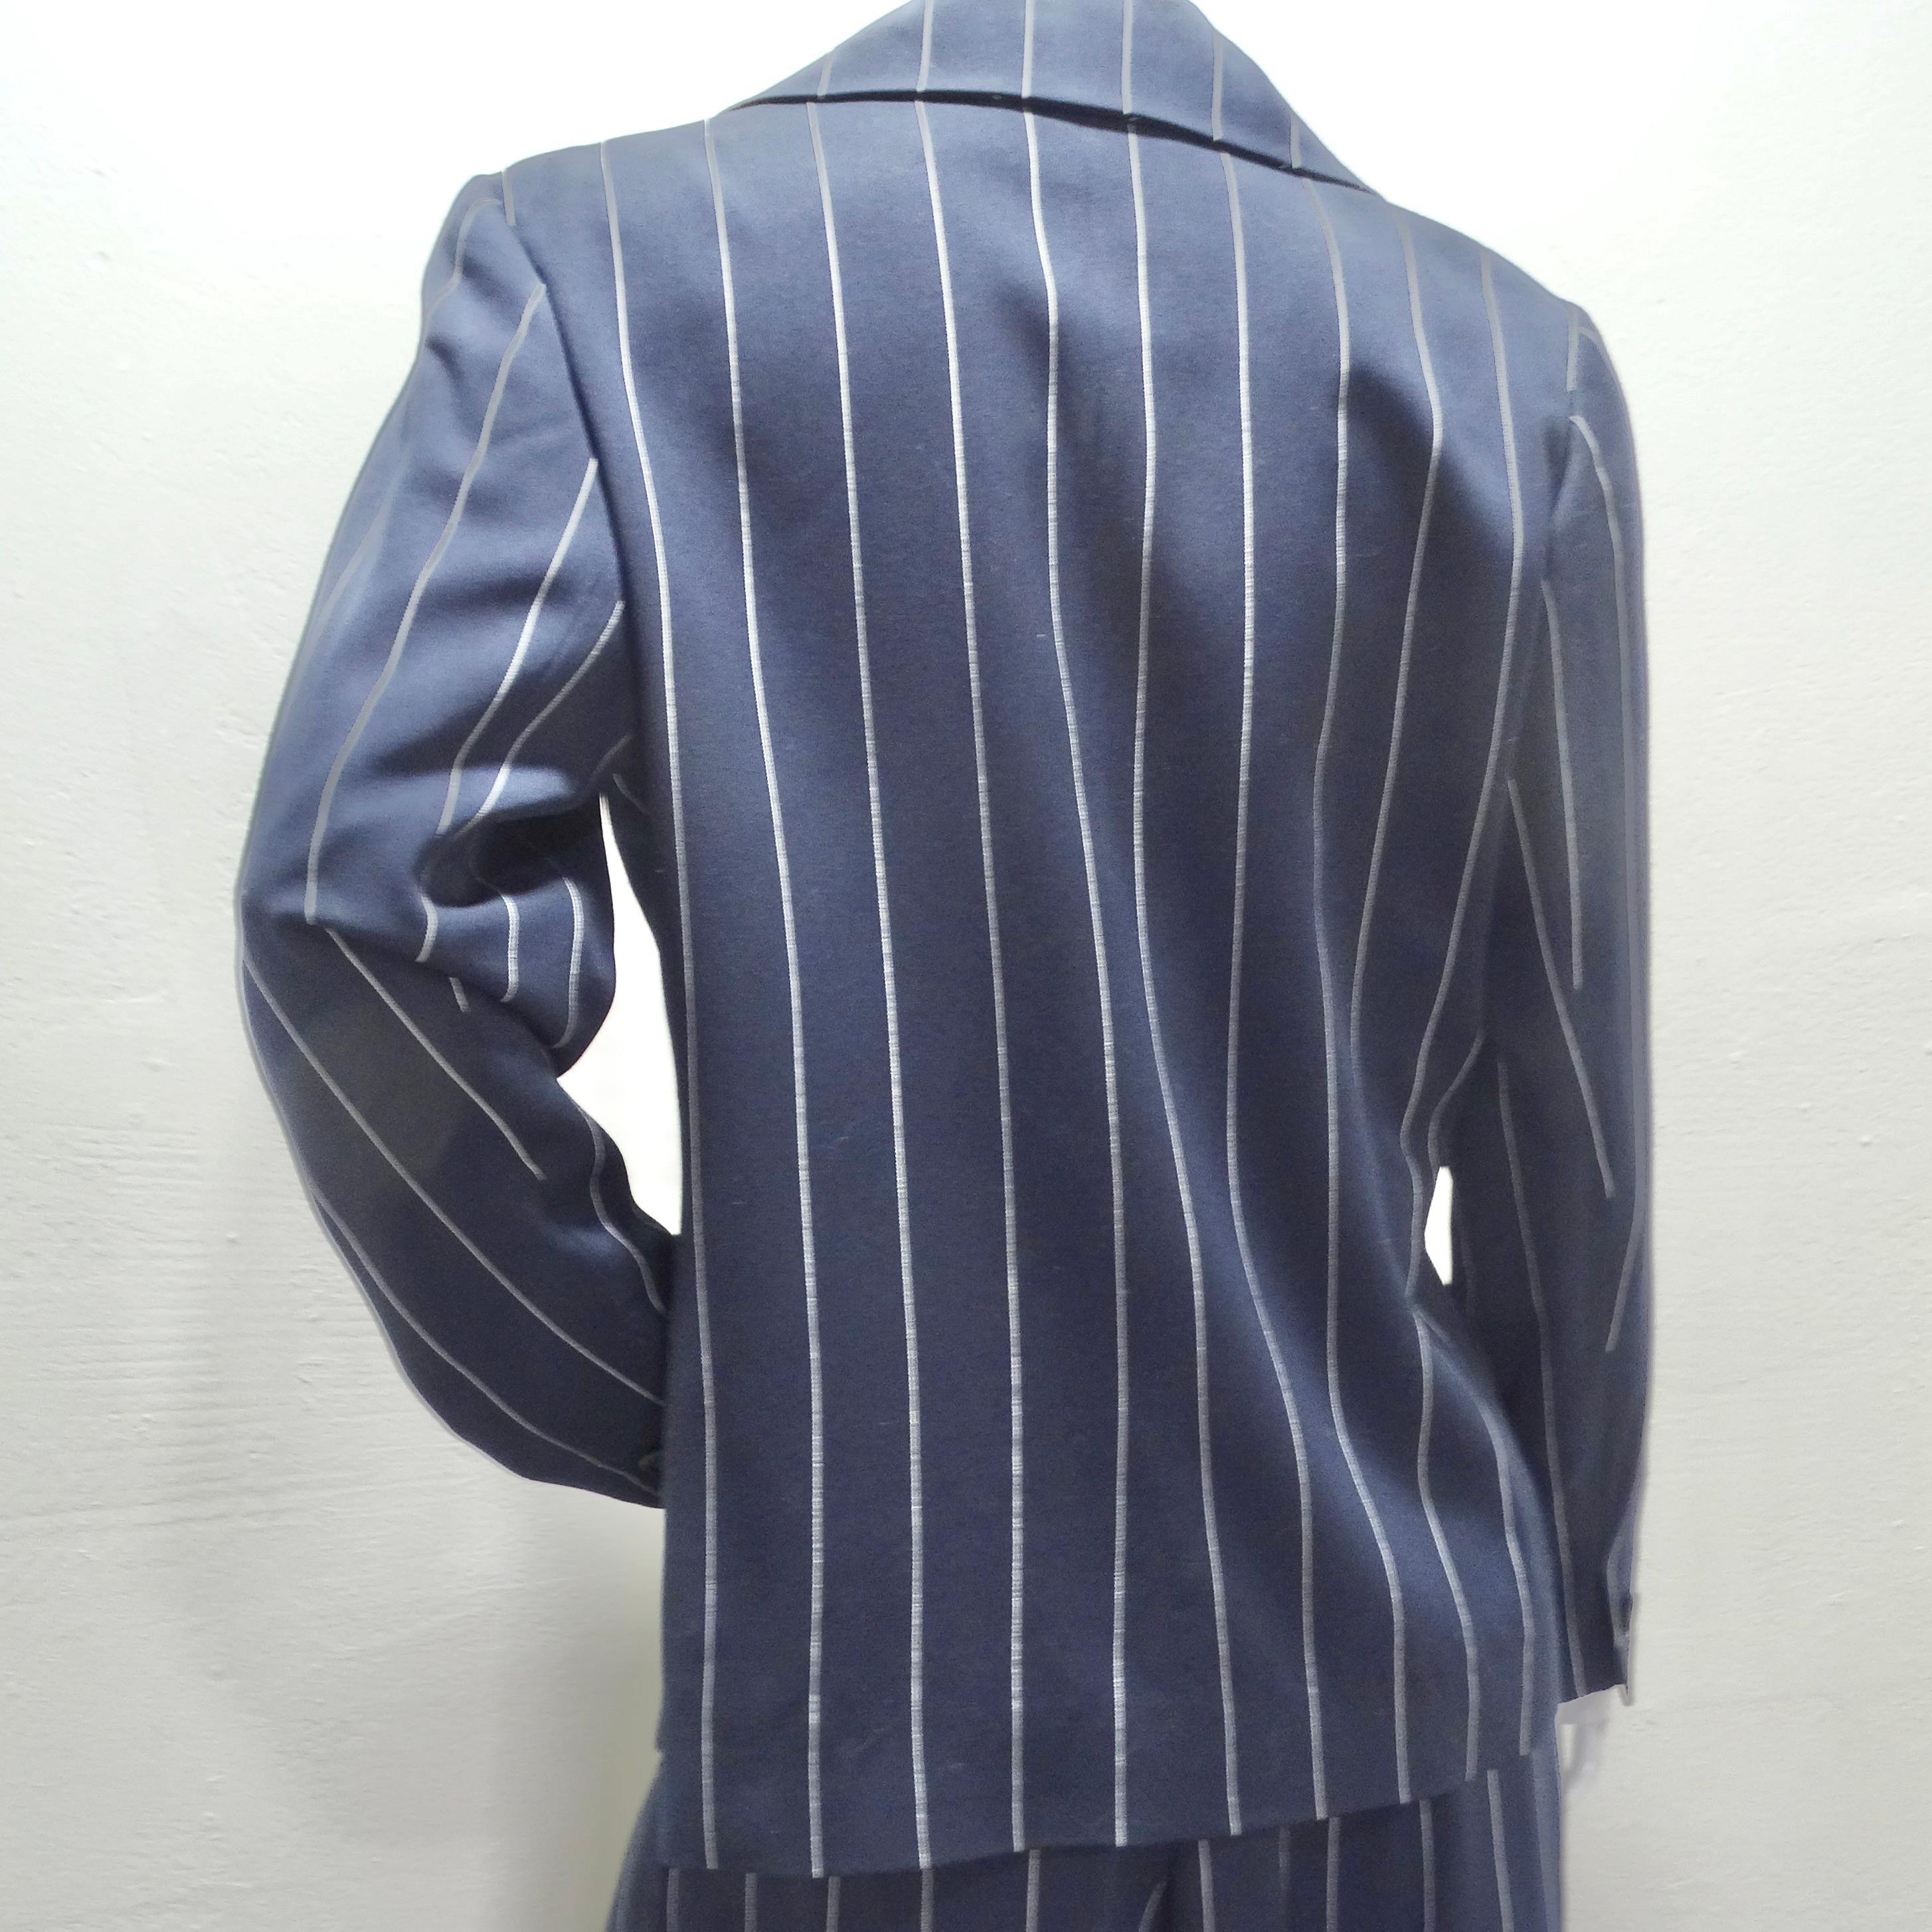 Christian Dior 1990s Navy Pinstripe Suit For Sale 10